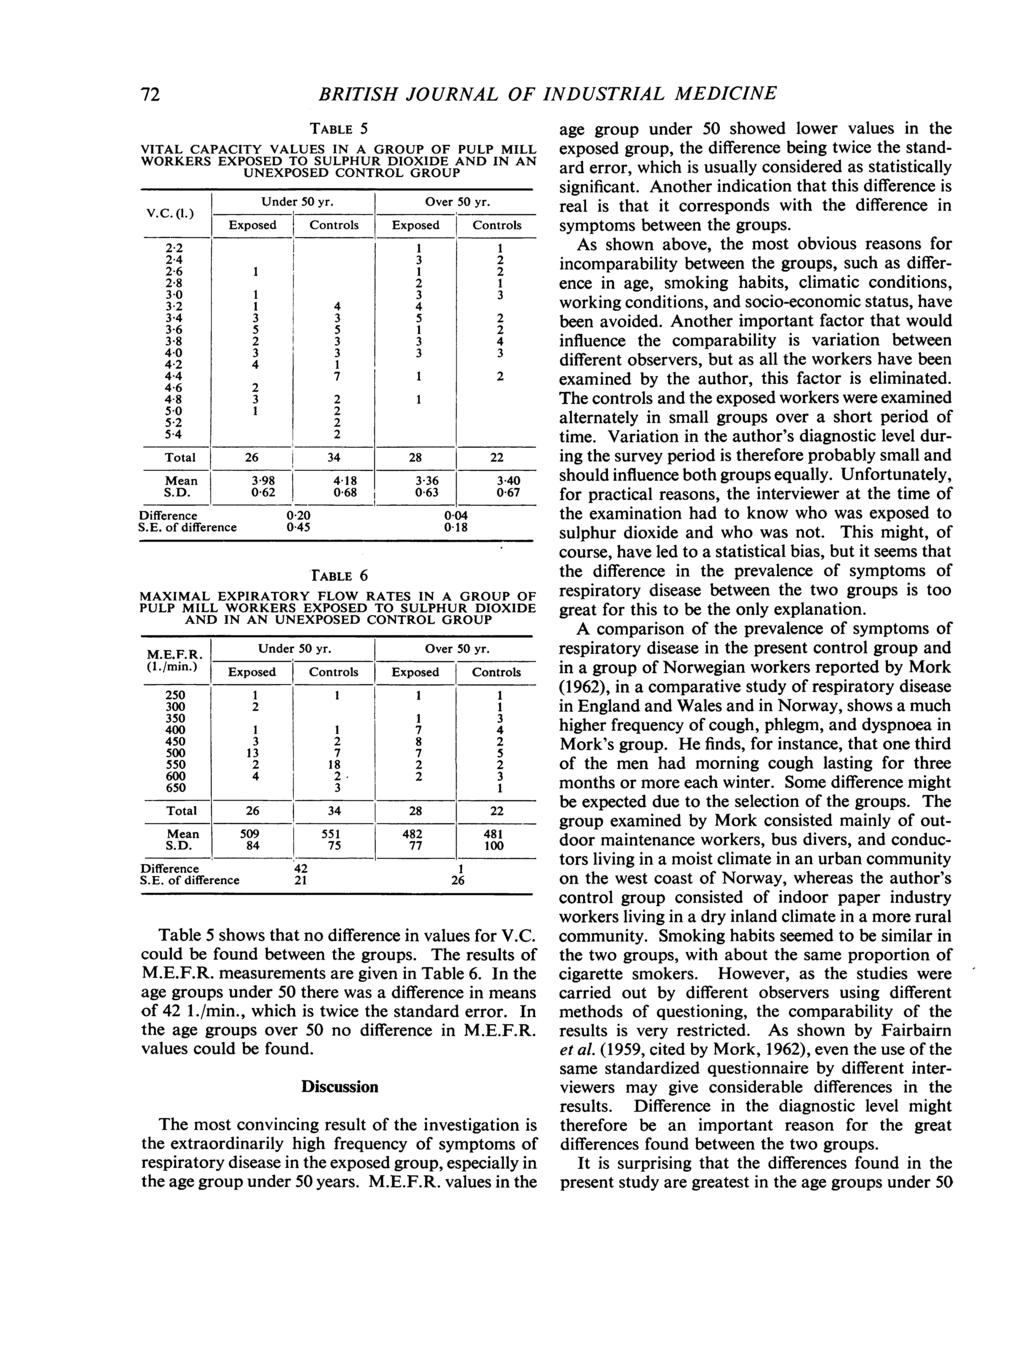 72 BRITISH JOURNAL OF INDUSTRIAL MEDICINE TABLE 5 VITAL CAPACITY VALUES IN A GROUP OF PULP MILL WORKERS EXPOSED TO SULPHUR DIOXIDE AND IN AN UNEXPOSED CONTROL GROUP Under 50 yr. Over 50 yr. V.C.(1.